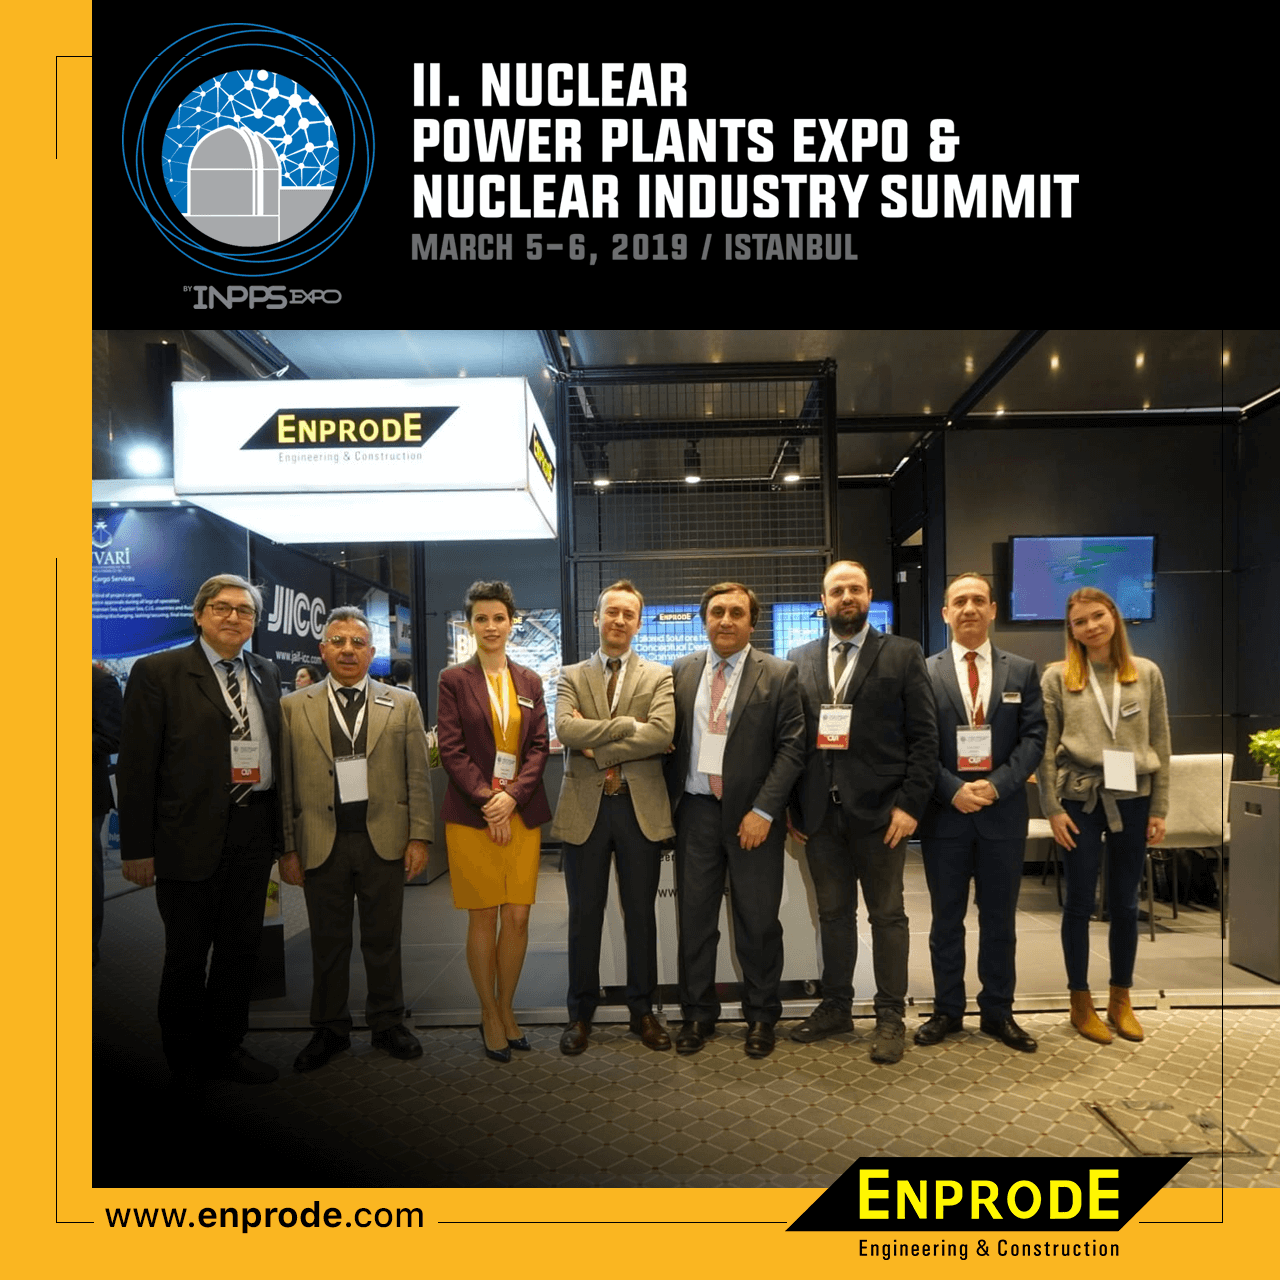 NUCLEAR POWER PLANTS II.EXPO & VI.SUMMIT 5-6 MARCH 2019